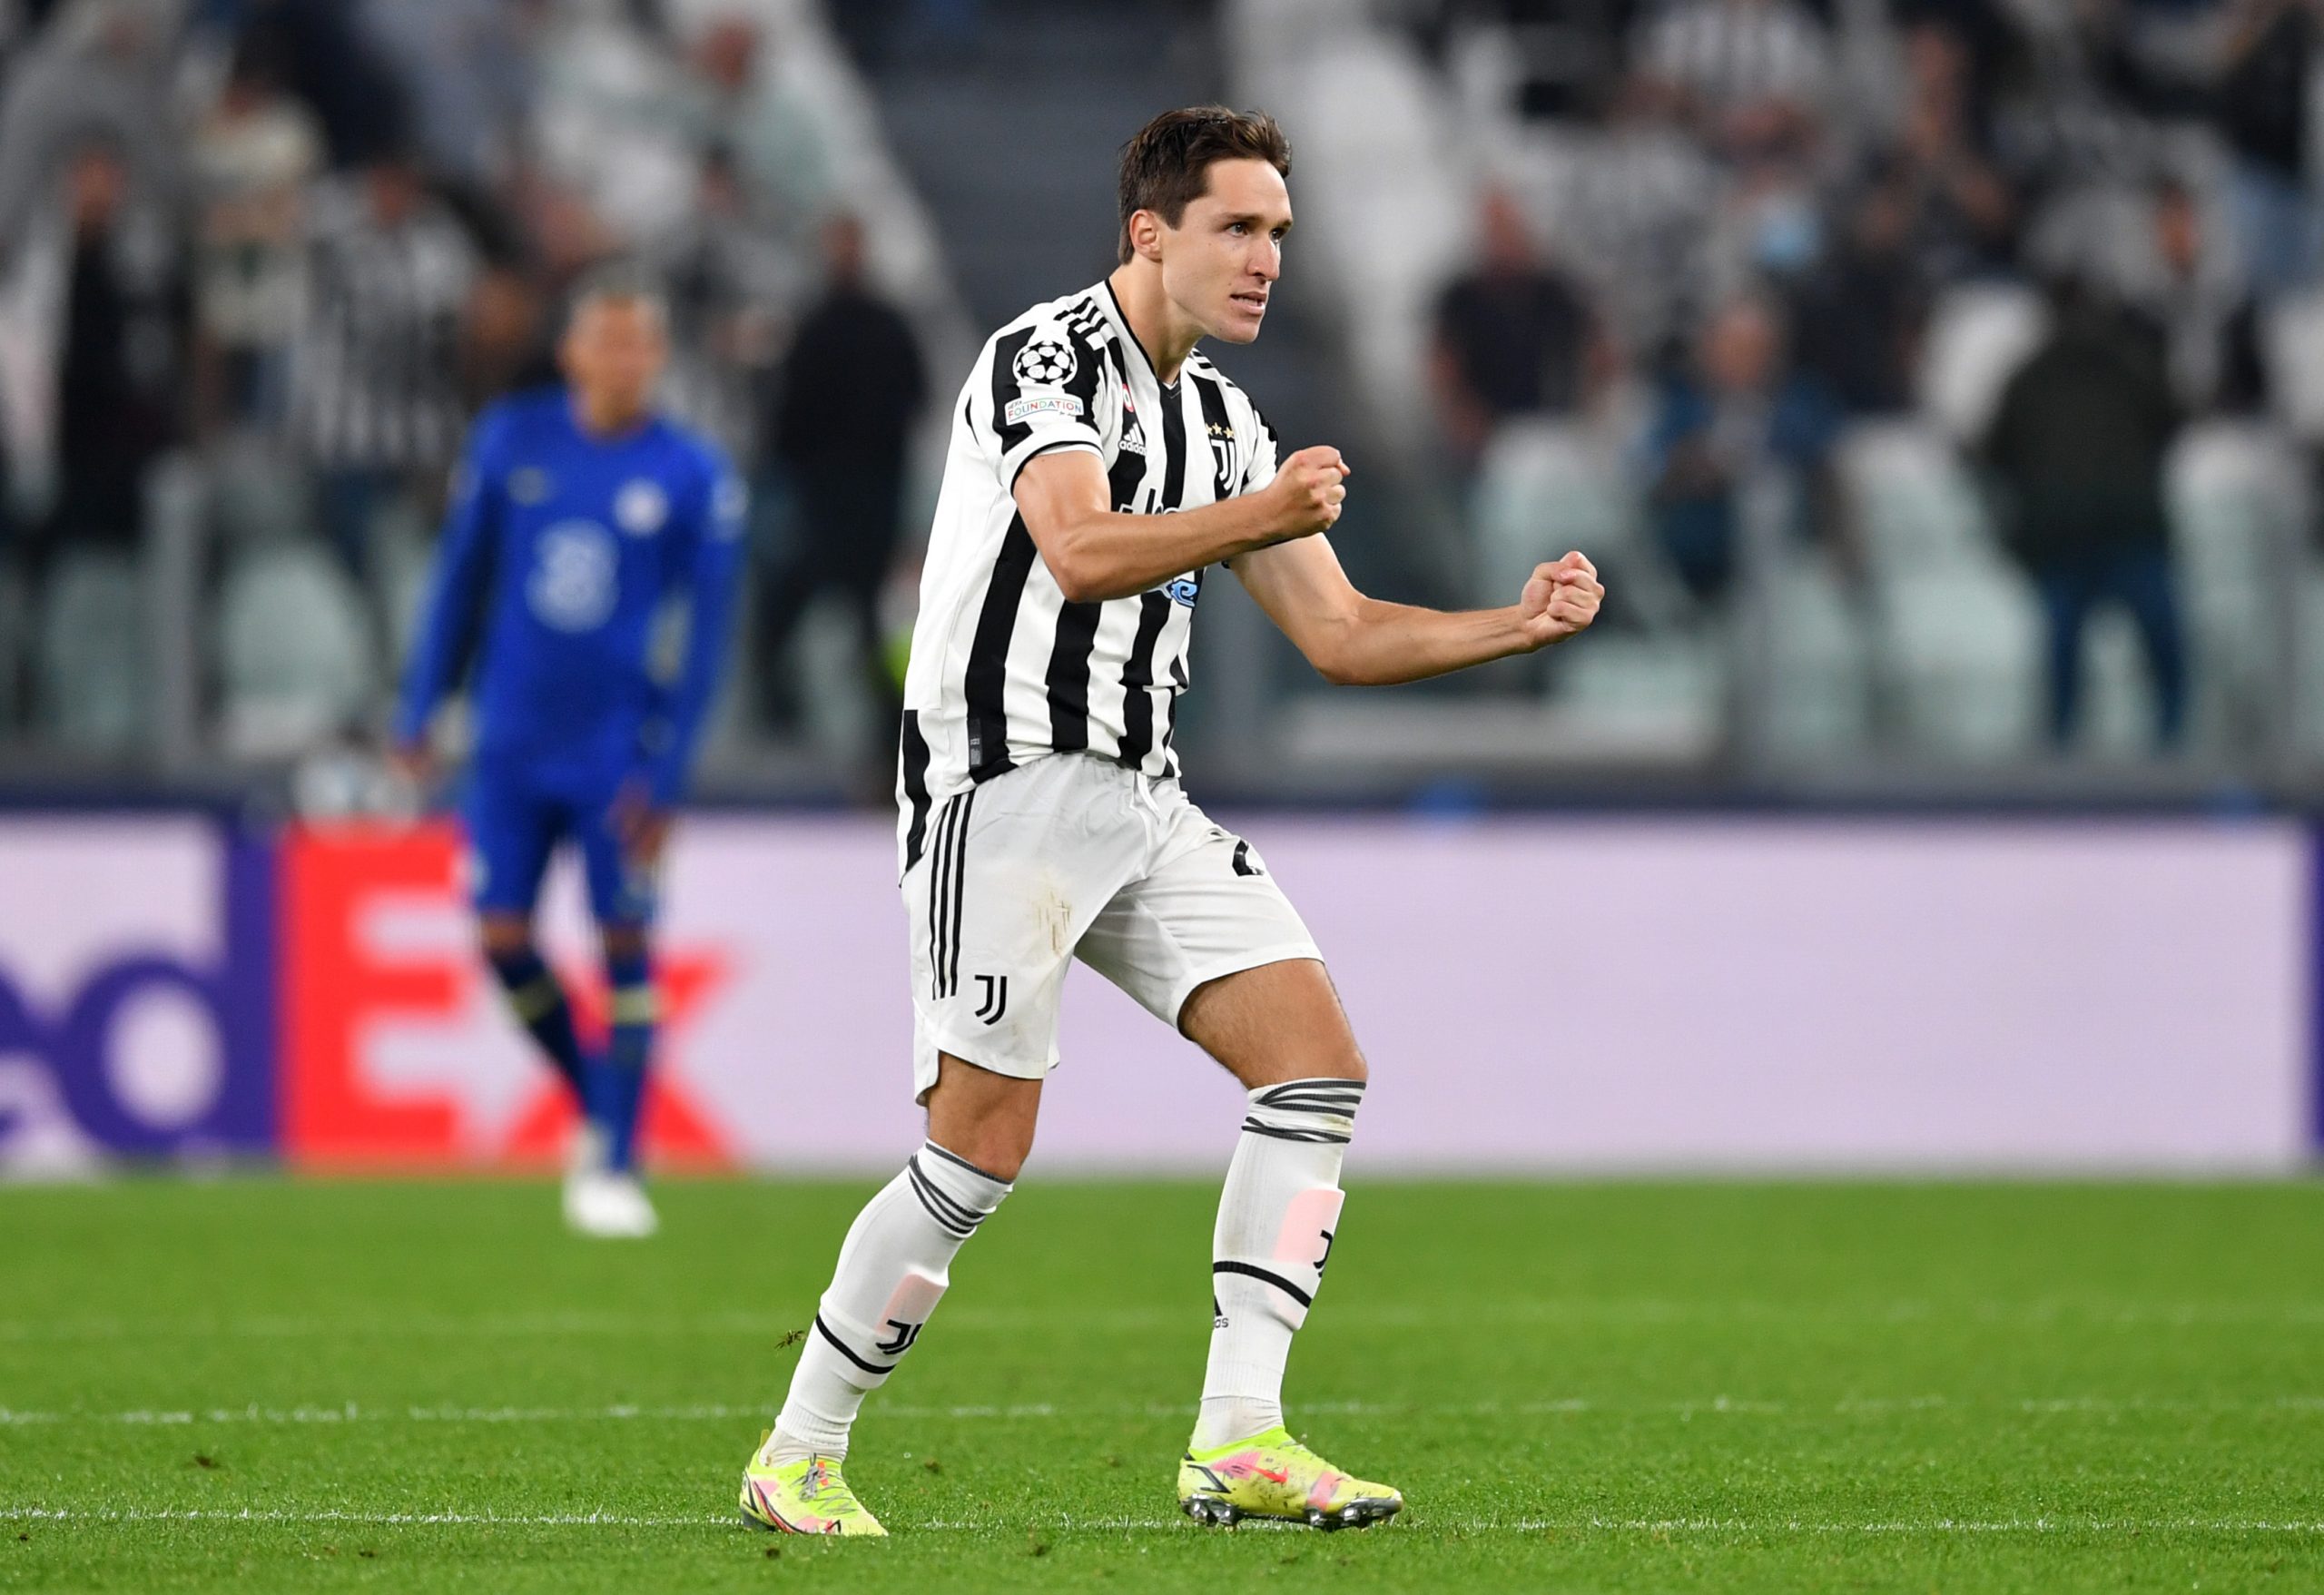 Federico Chiesa of Juventus celebrates after scoring their side's first goal during the UEFA Champions League group H match between Juventus and Chelsea FC.